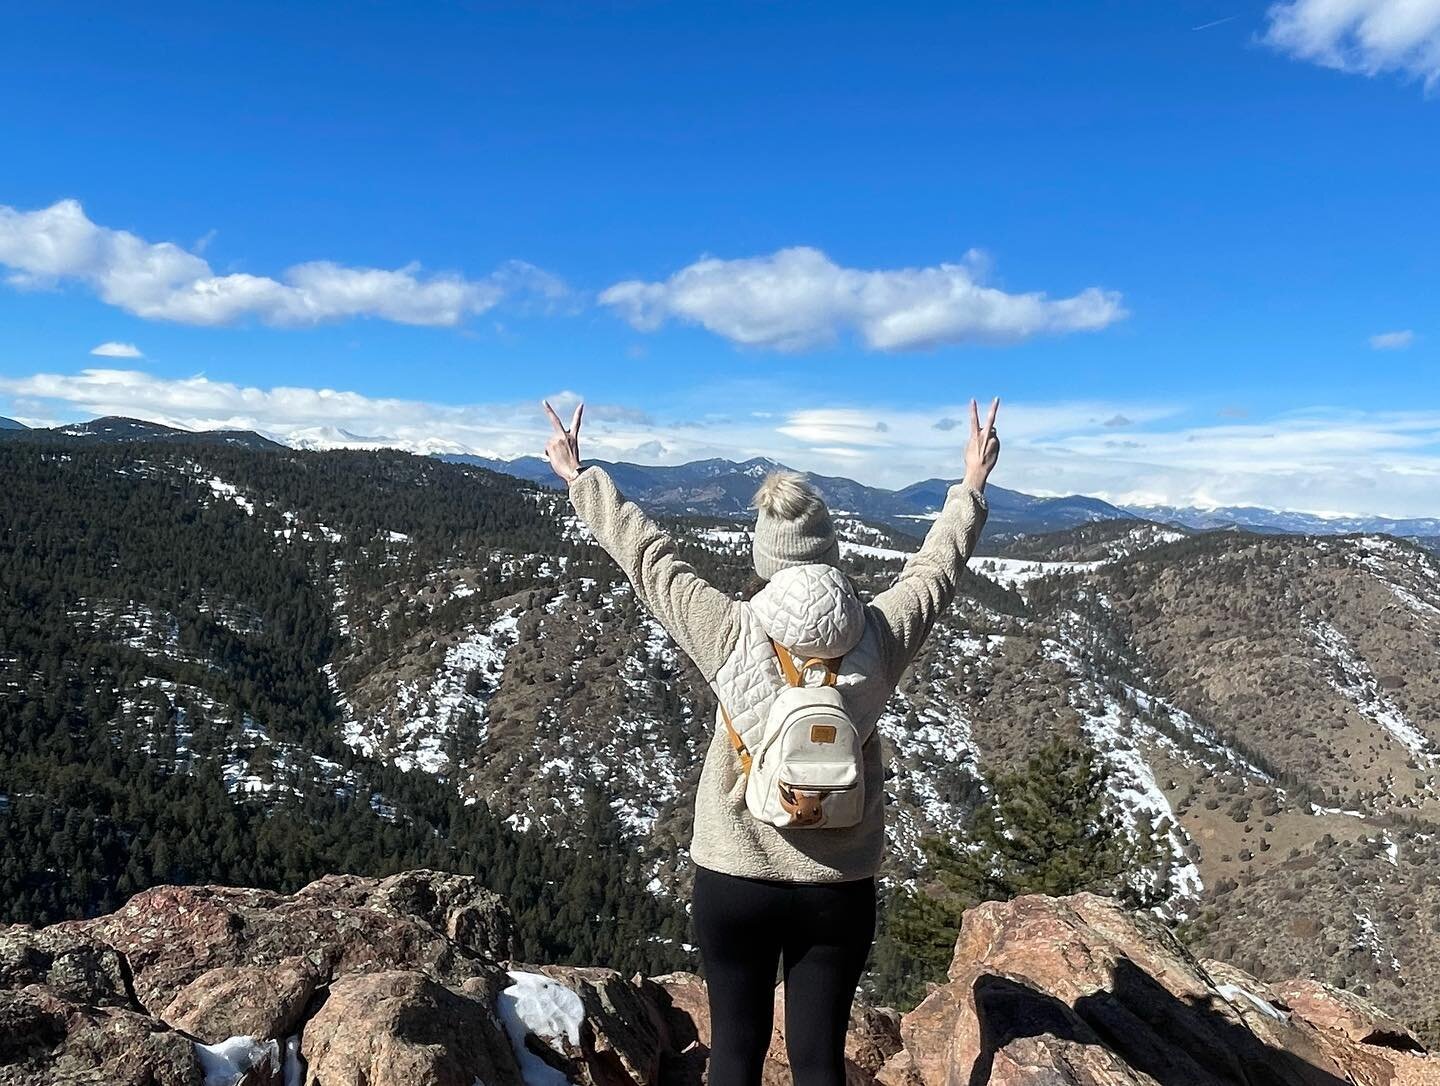 Wonderful days with outstanding people! #hikingintherockies #coloradohiking #coloradohikes #coloradohikingtrails #colorado #denver #denvercolorado #thingstodoindenver #nature #fit #outdoors #hike #travel #adventure #explore #hiking #hikingadventures 